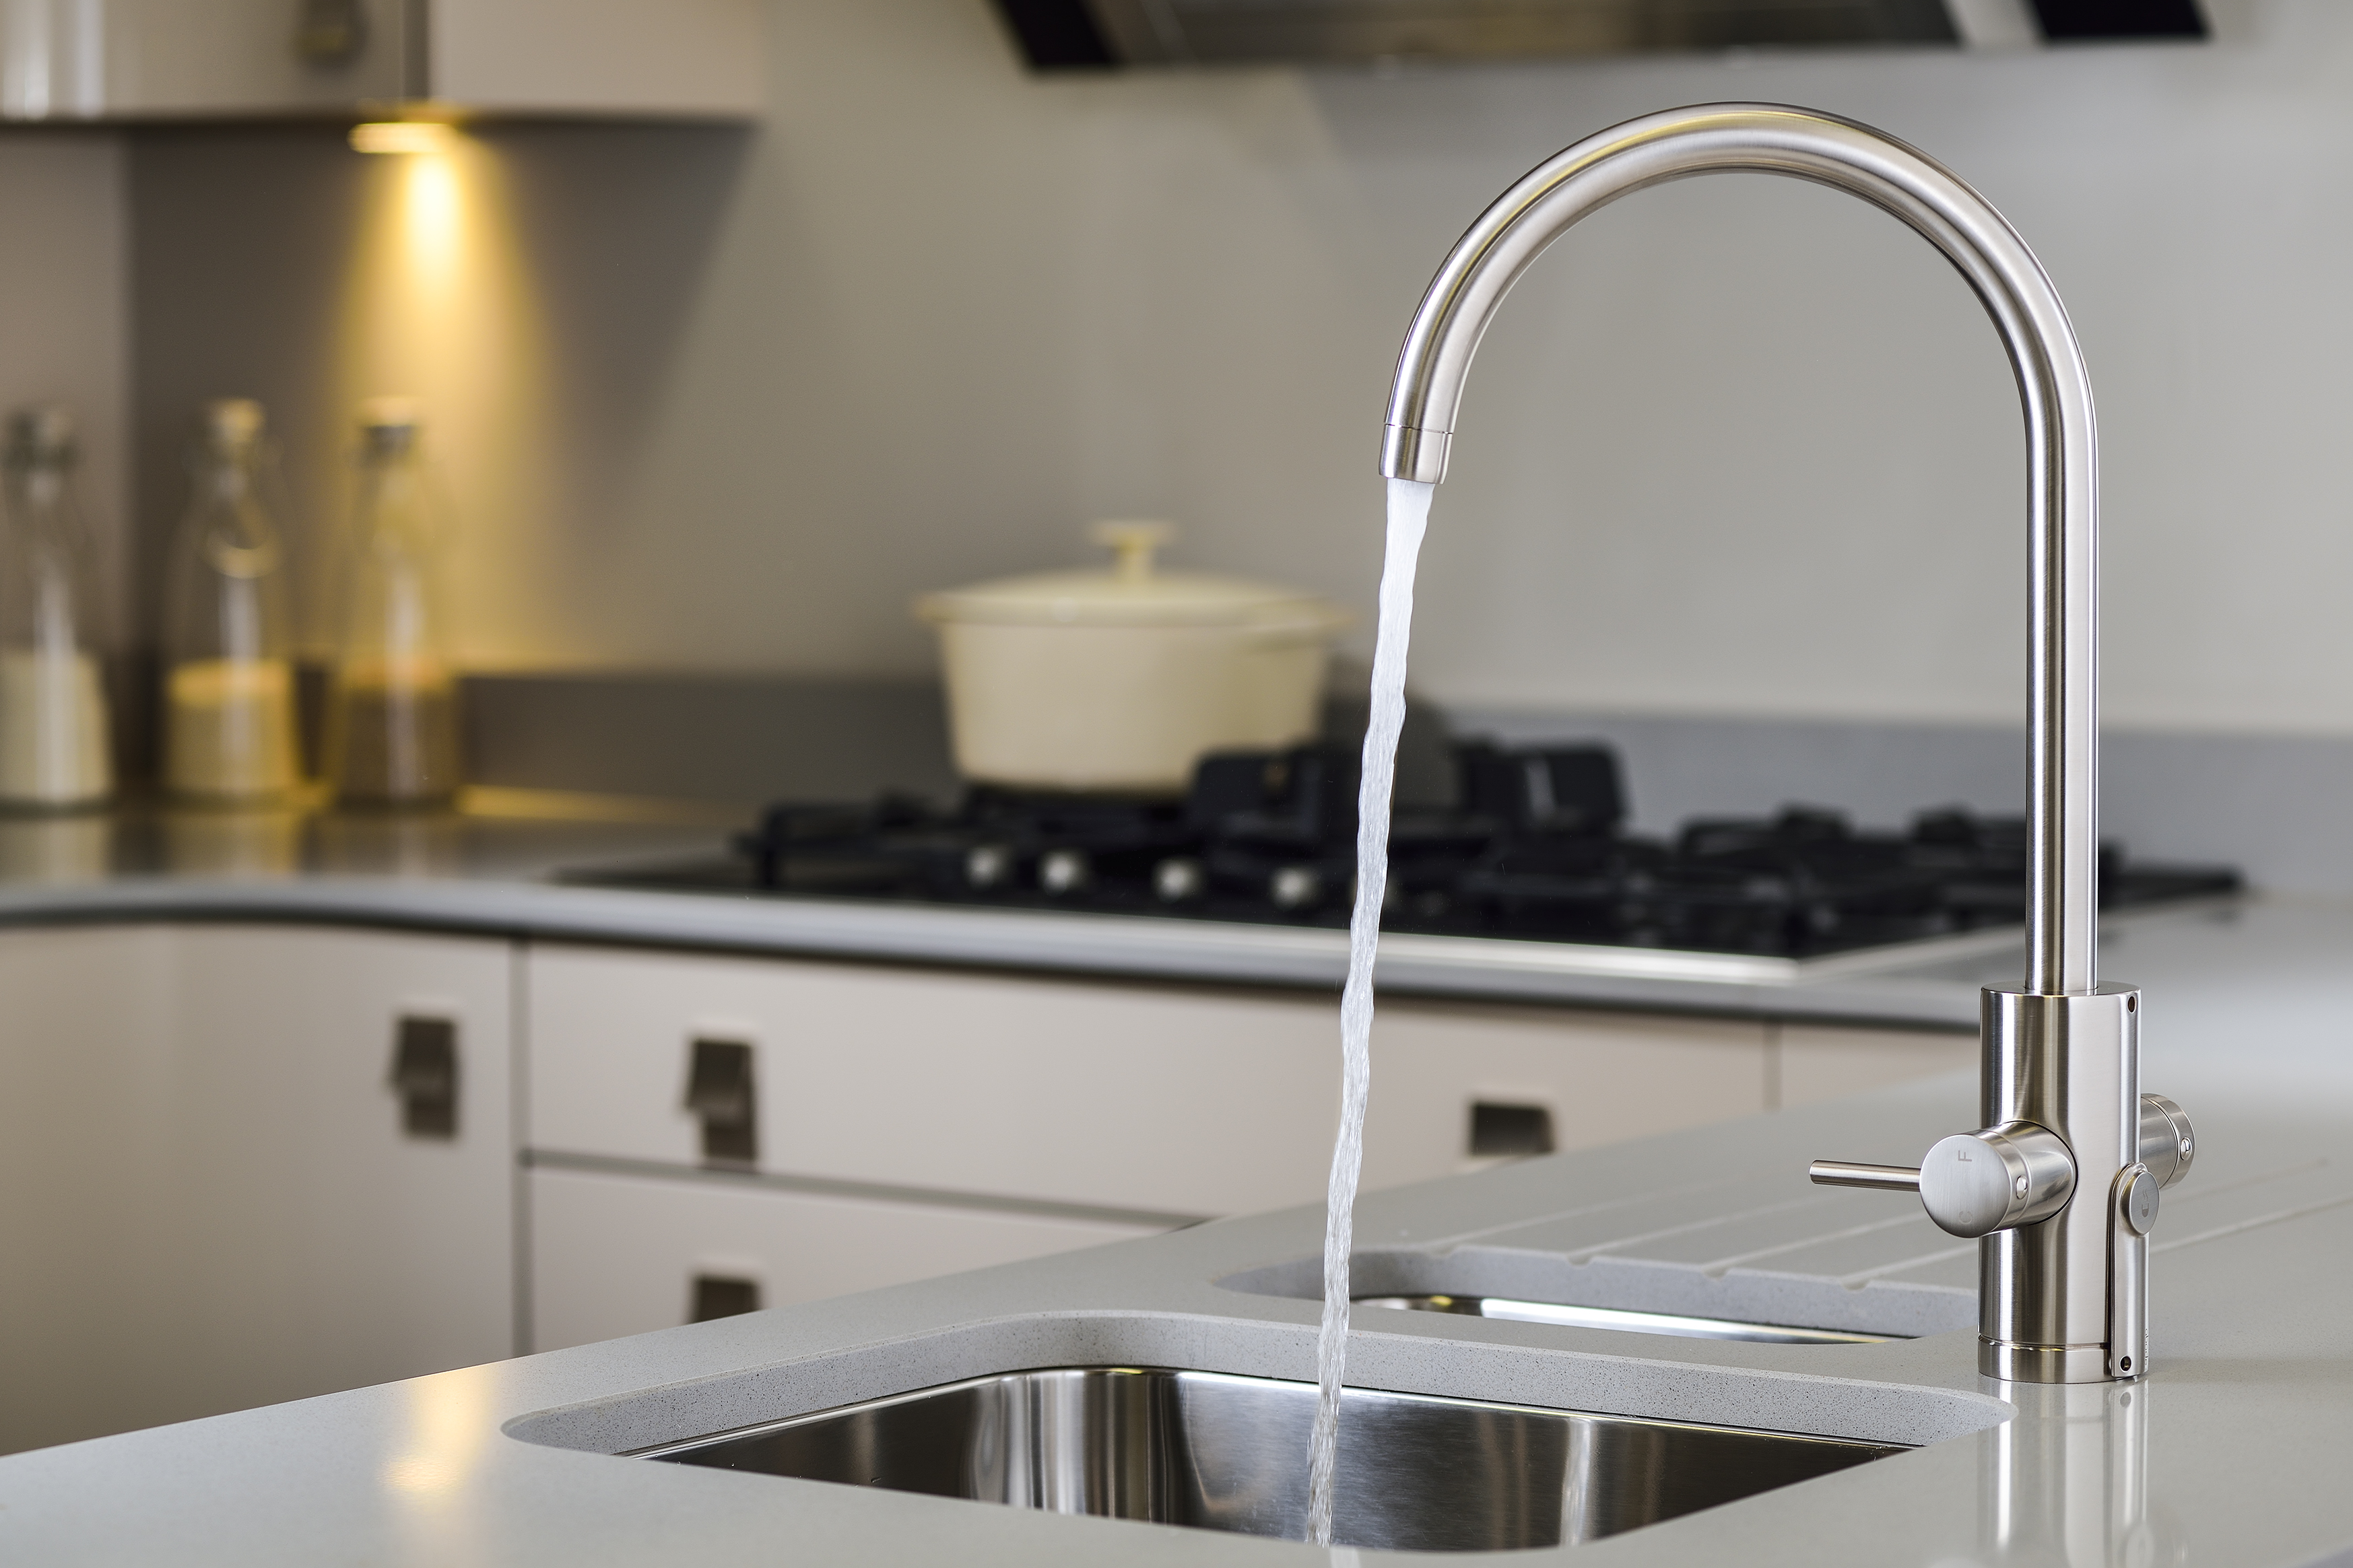 The Abode boiling water taps featured within the range at Benchmarx Kitchens start from around £709 (Benchmarx Kitchens/PA)